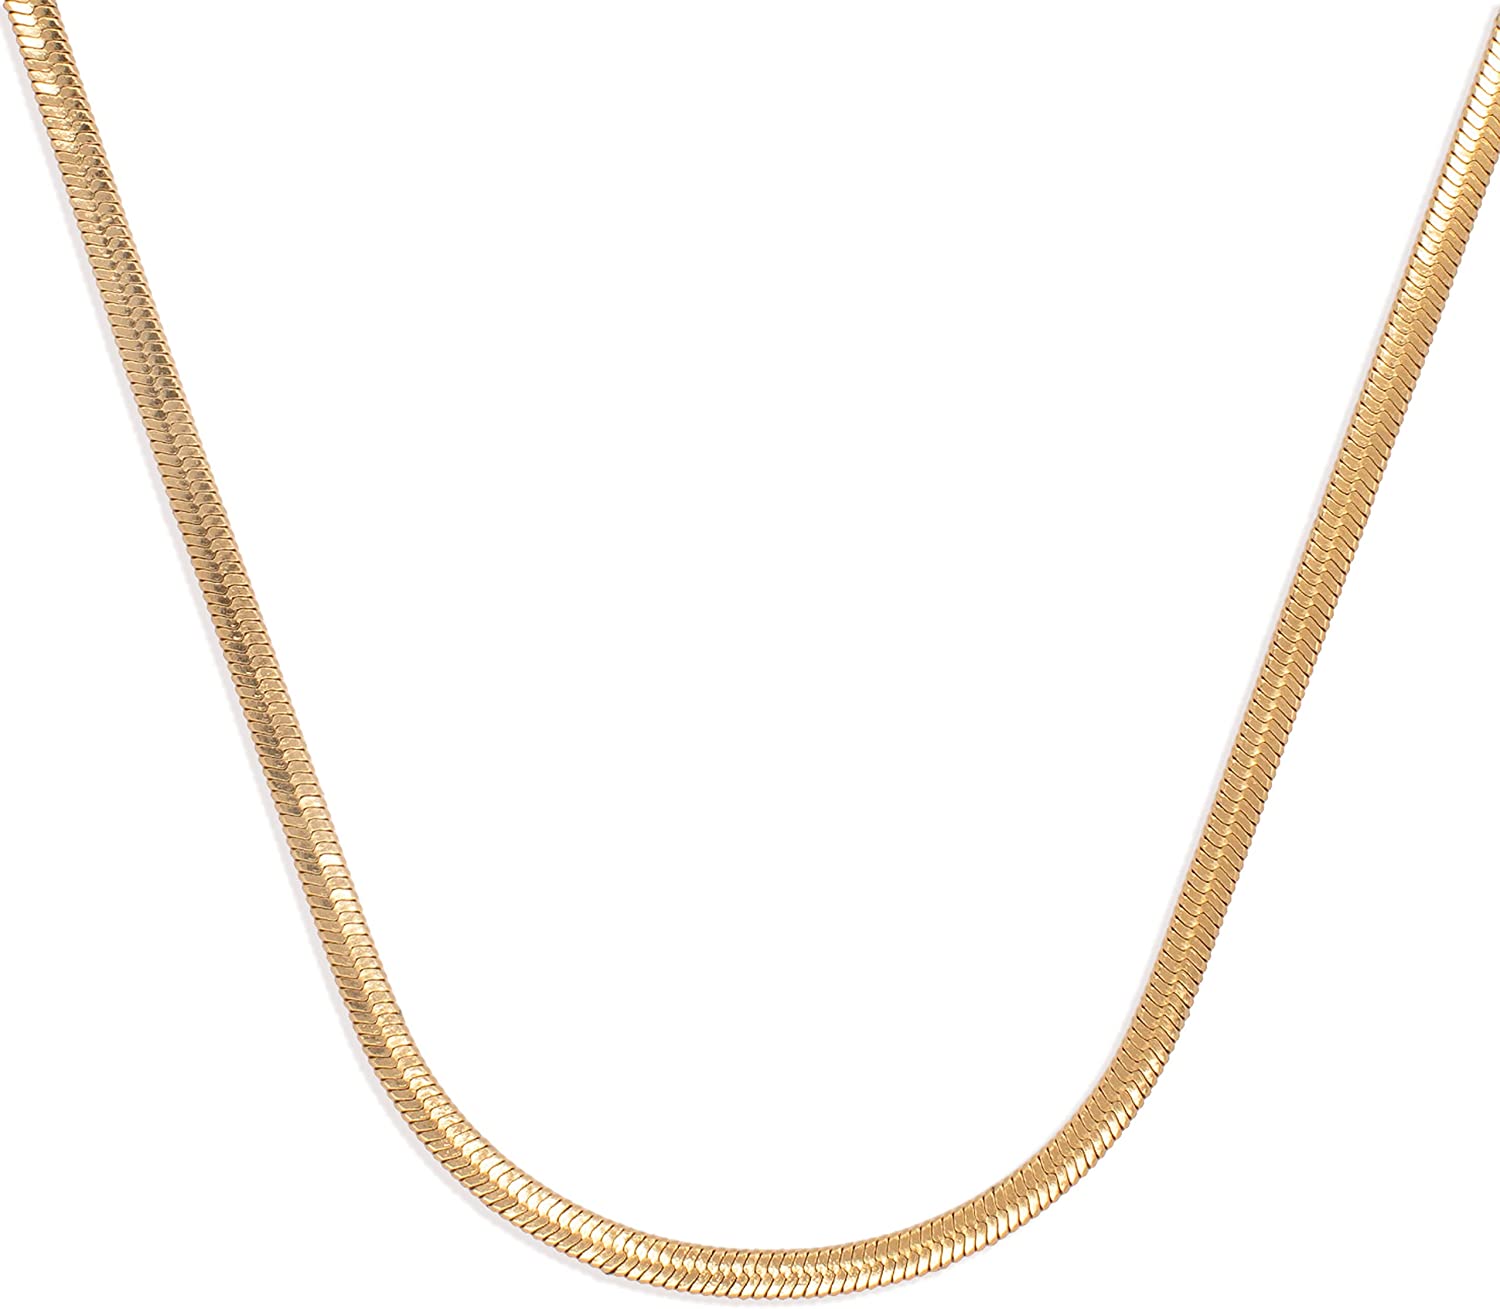 Hey Harper Nassau Necklace - Waterproof & Sweatproof Simple Womens Necklaces for Everyday Wear - Silver, Rose Gold, Gold Necklaces for Women - Stainless Steel Necklace - Herringbone Chain with 14k Golden Color PVD Coating - Necklaces for Women Tre